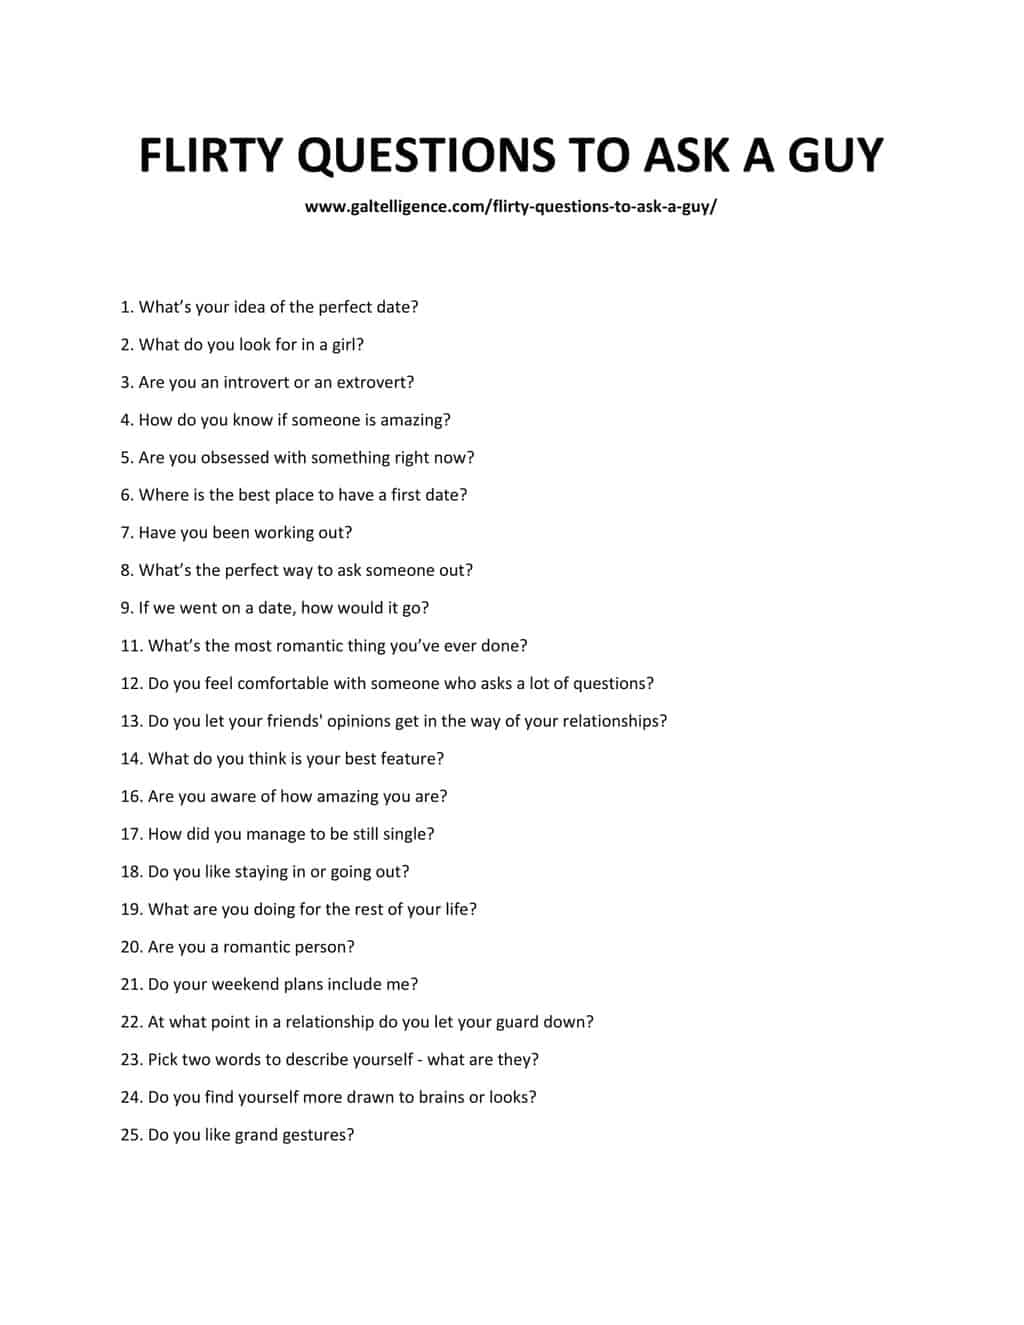 50 flirty questions to ask a guy